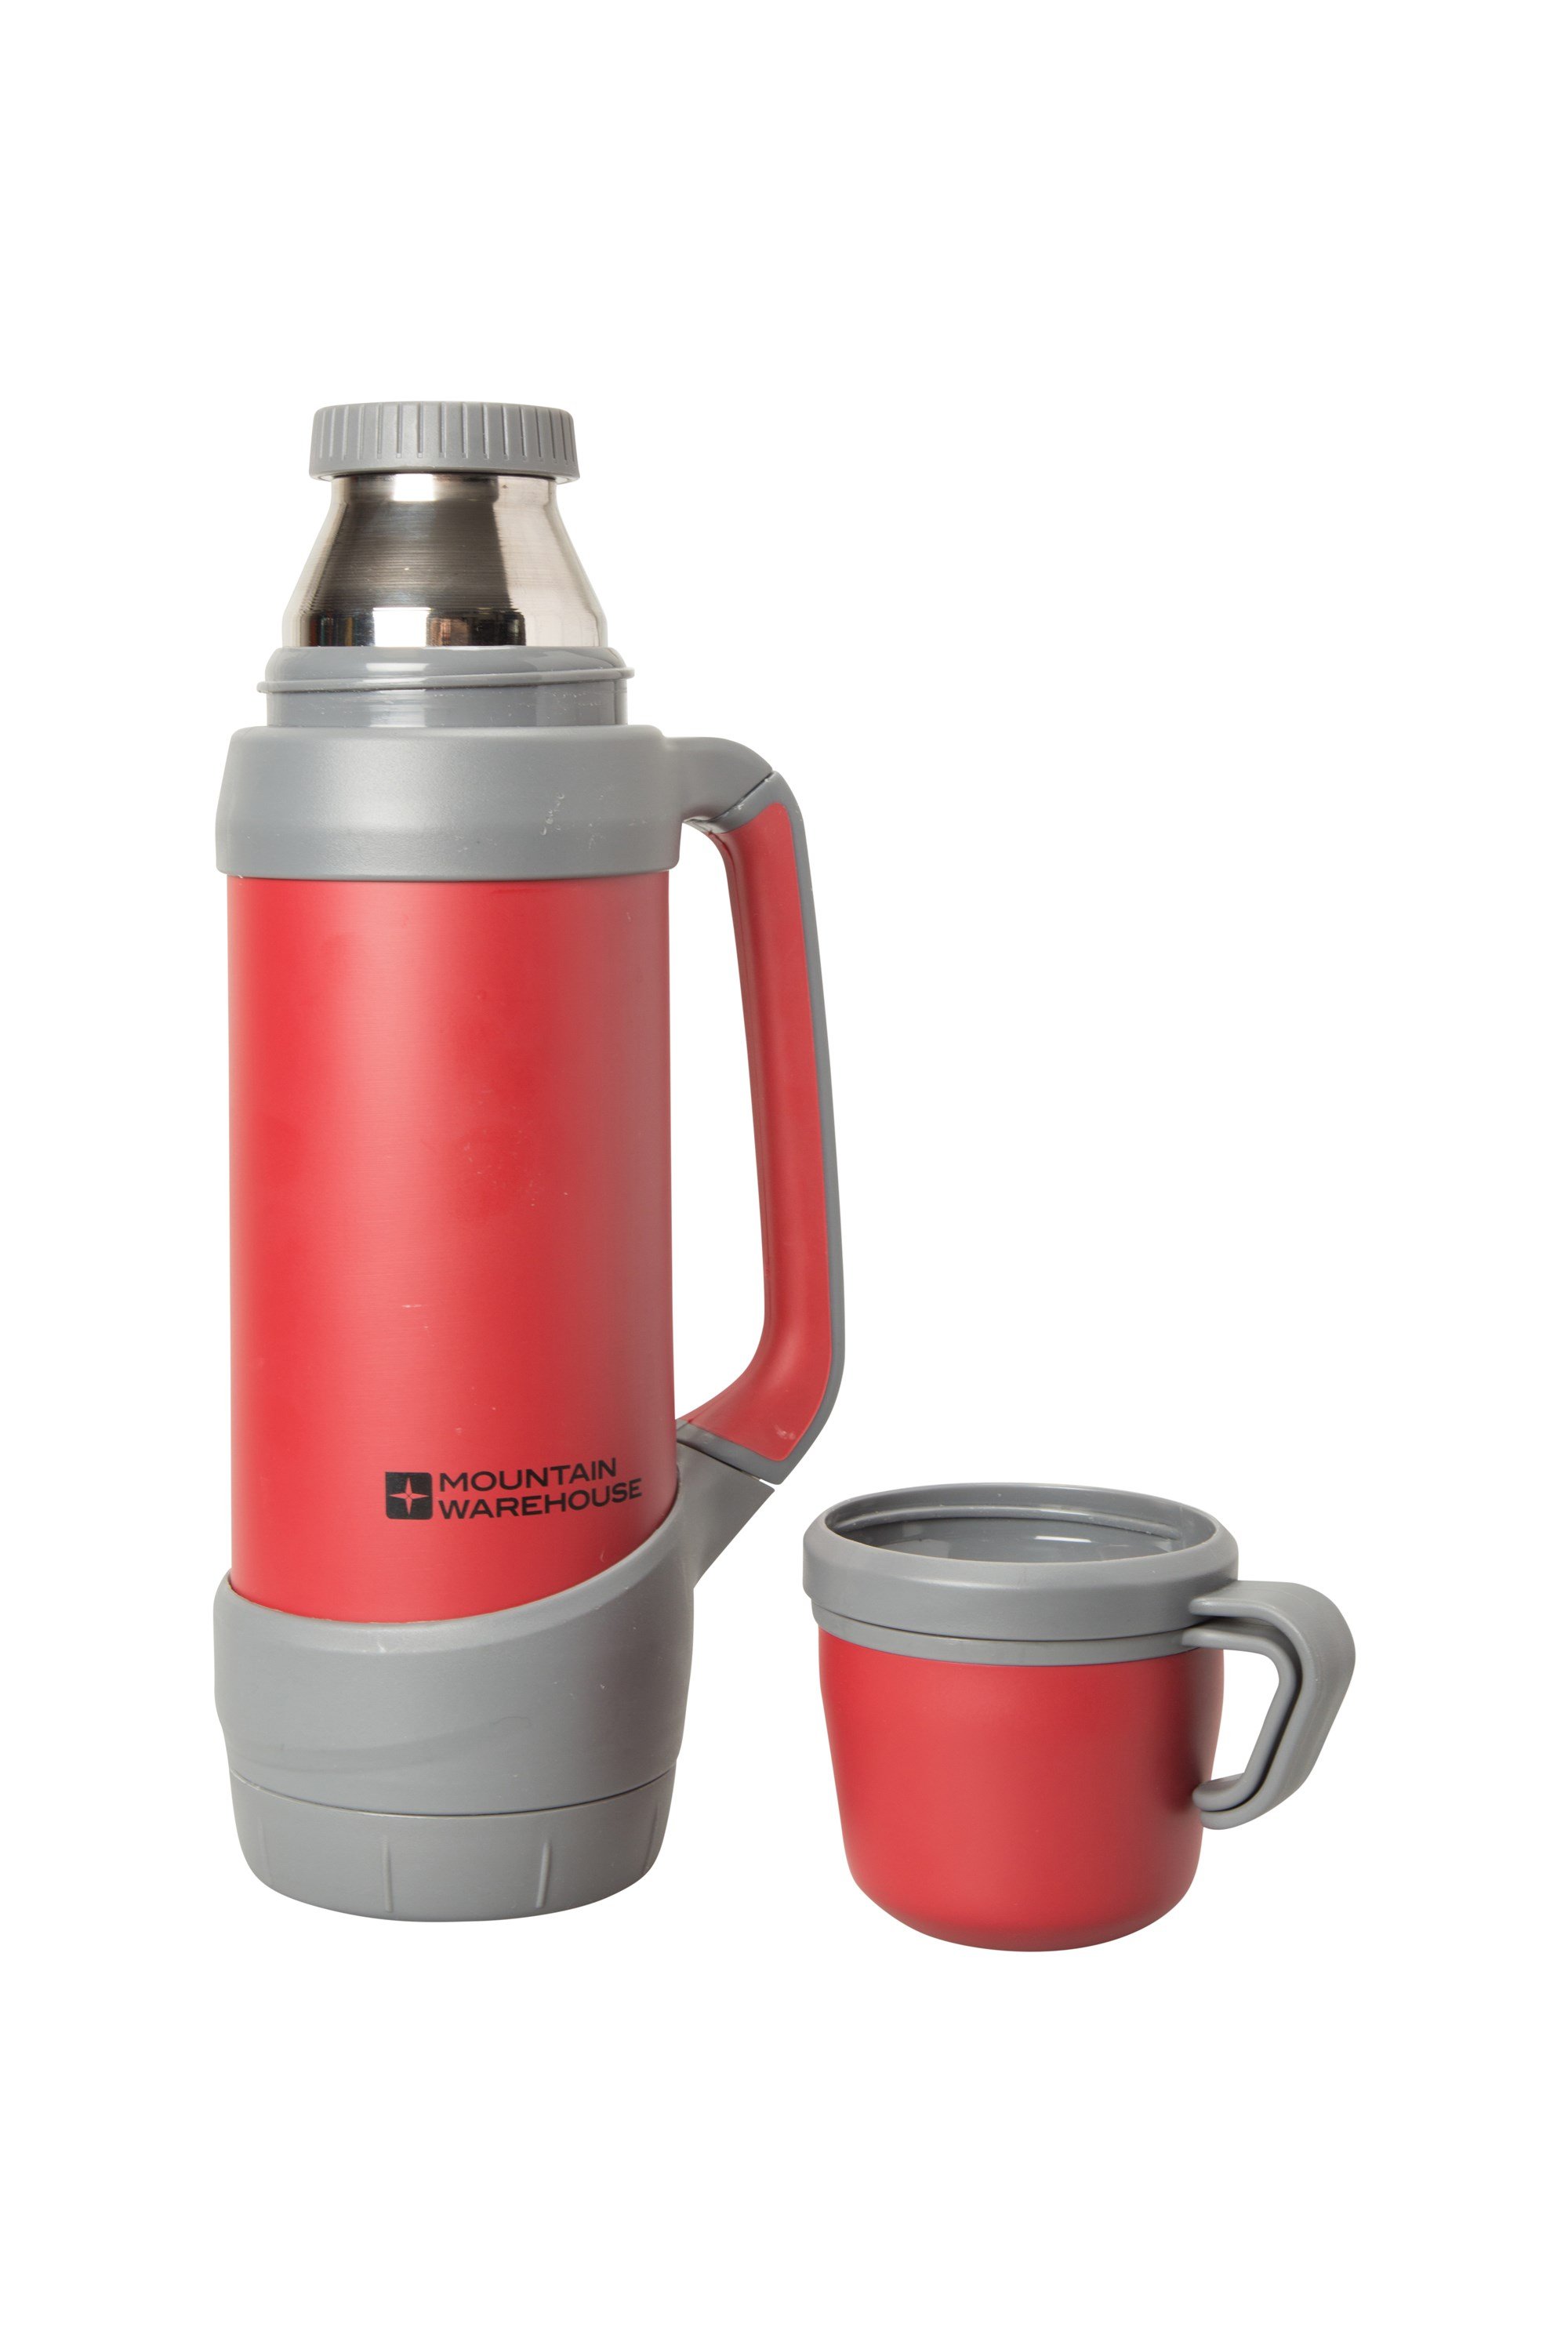 https://img.cdn.mountainwarehouse.com/product/028111/028111_red_flask_with_2_cups_900ml_har_aw18_2.jpg